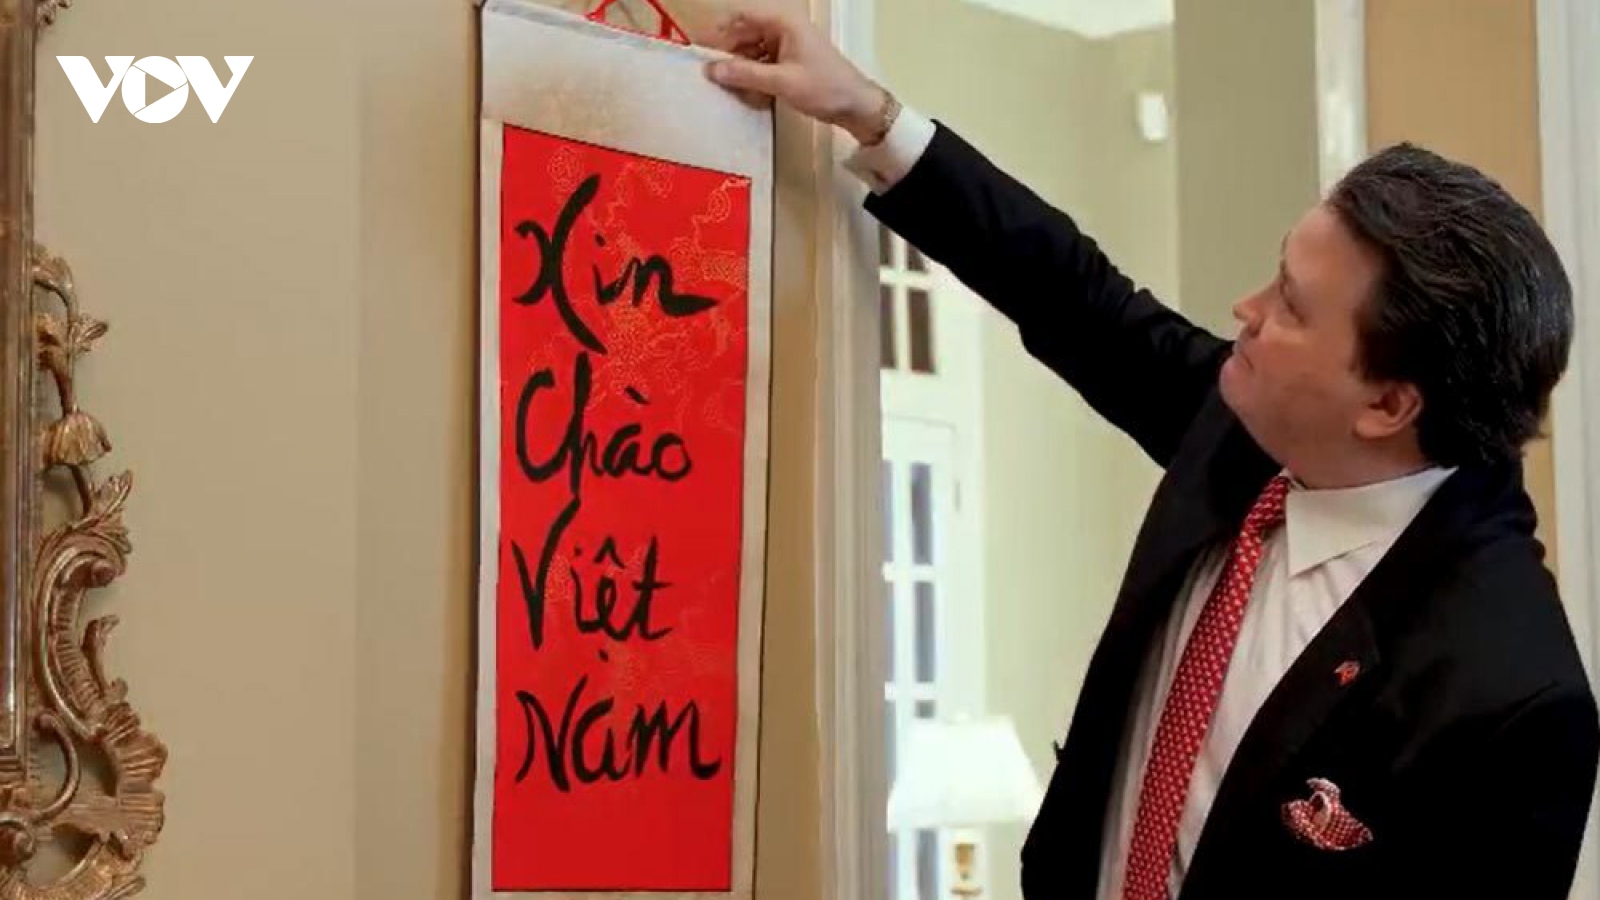 New US Ambassador extends Tet greetings through calligraphy works